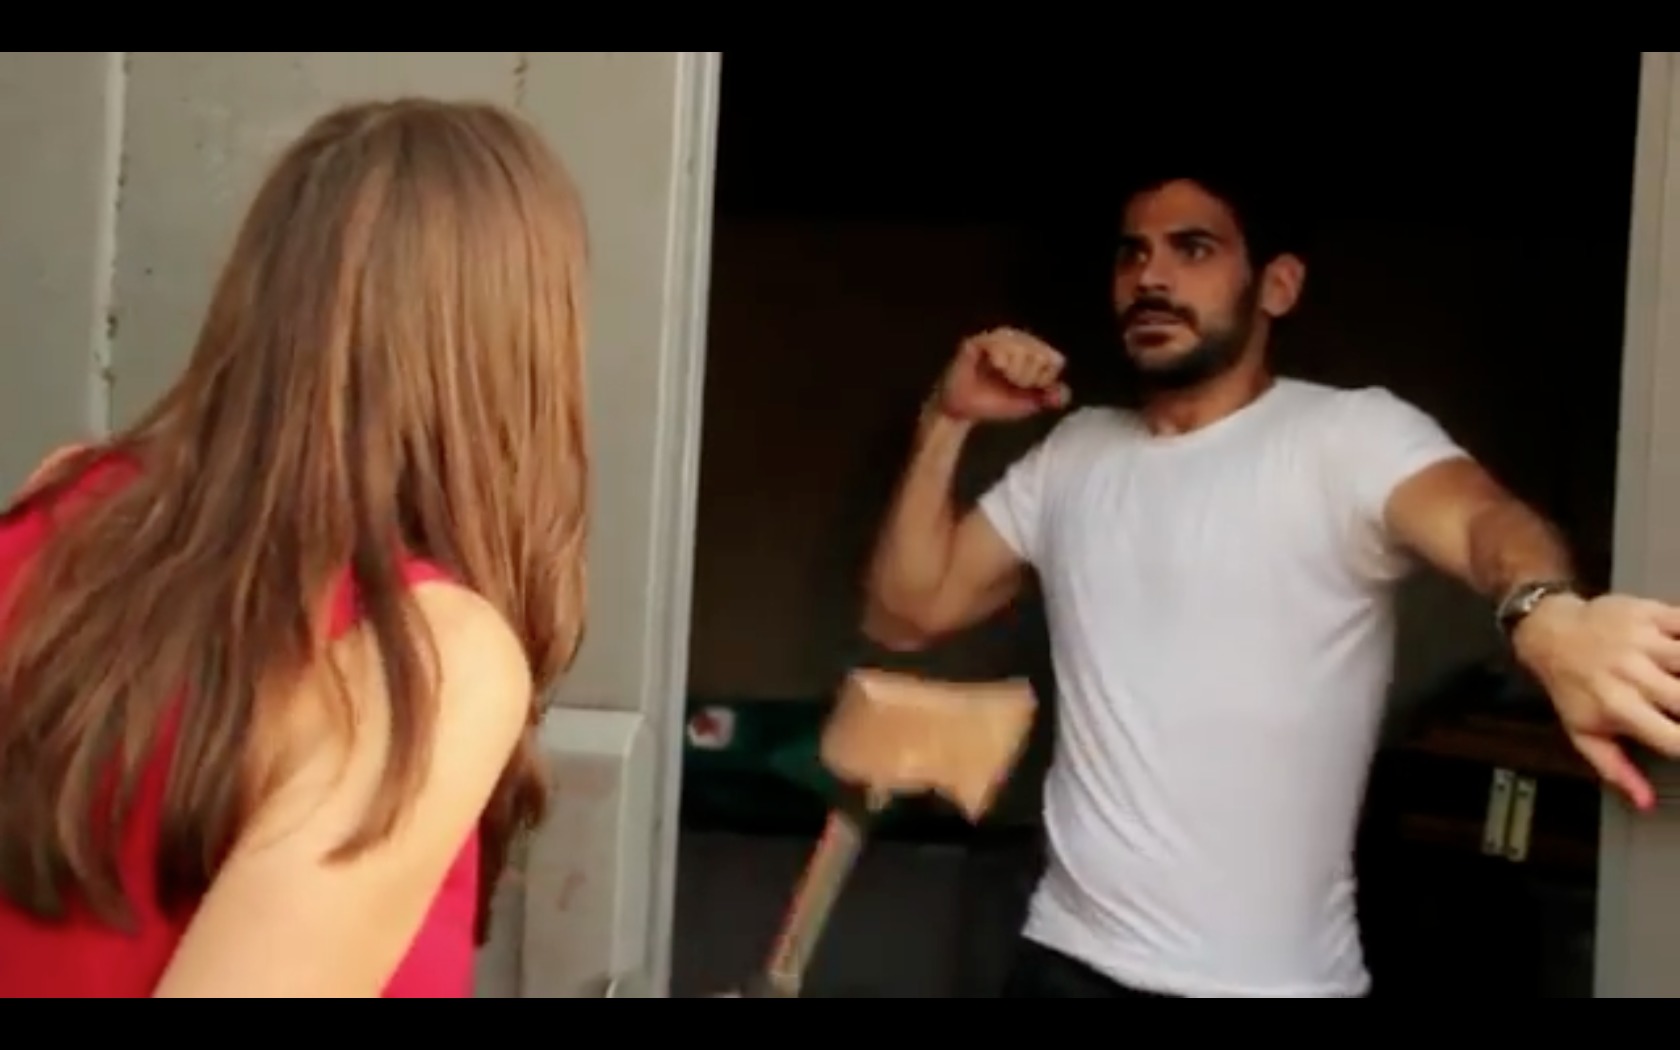 Melissa Vargas and Dave Honigman in a short directed by Frankie Honigman.